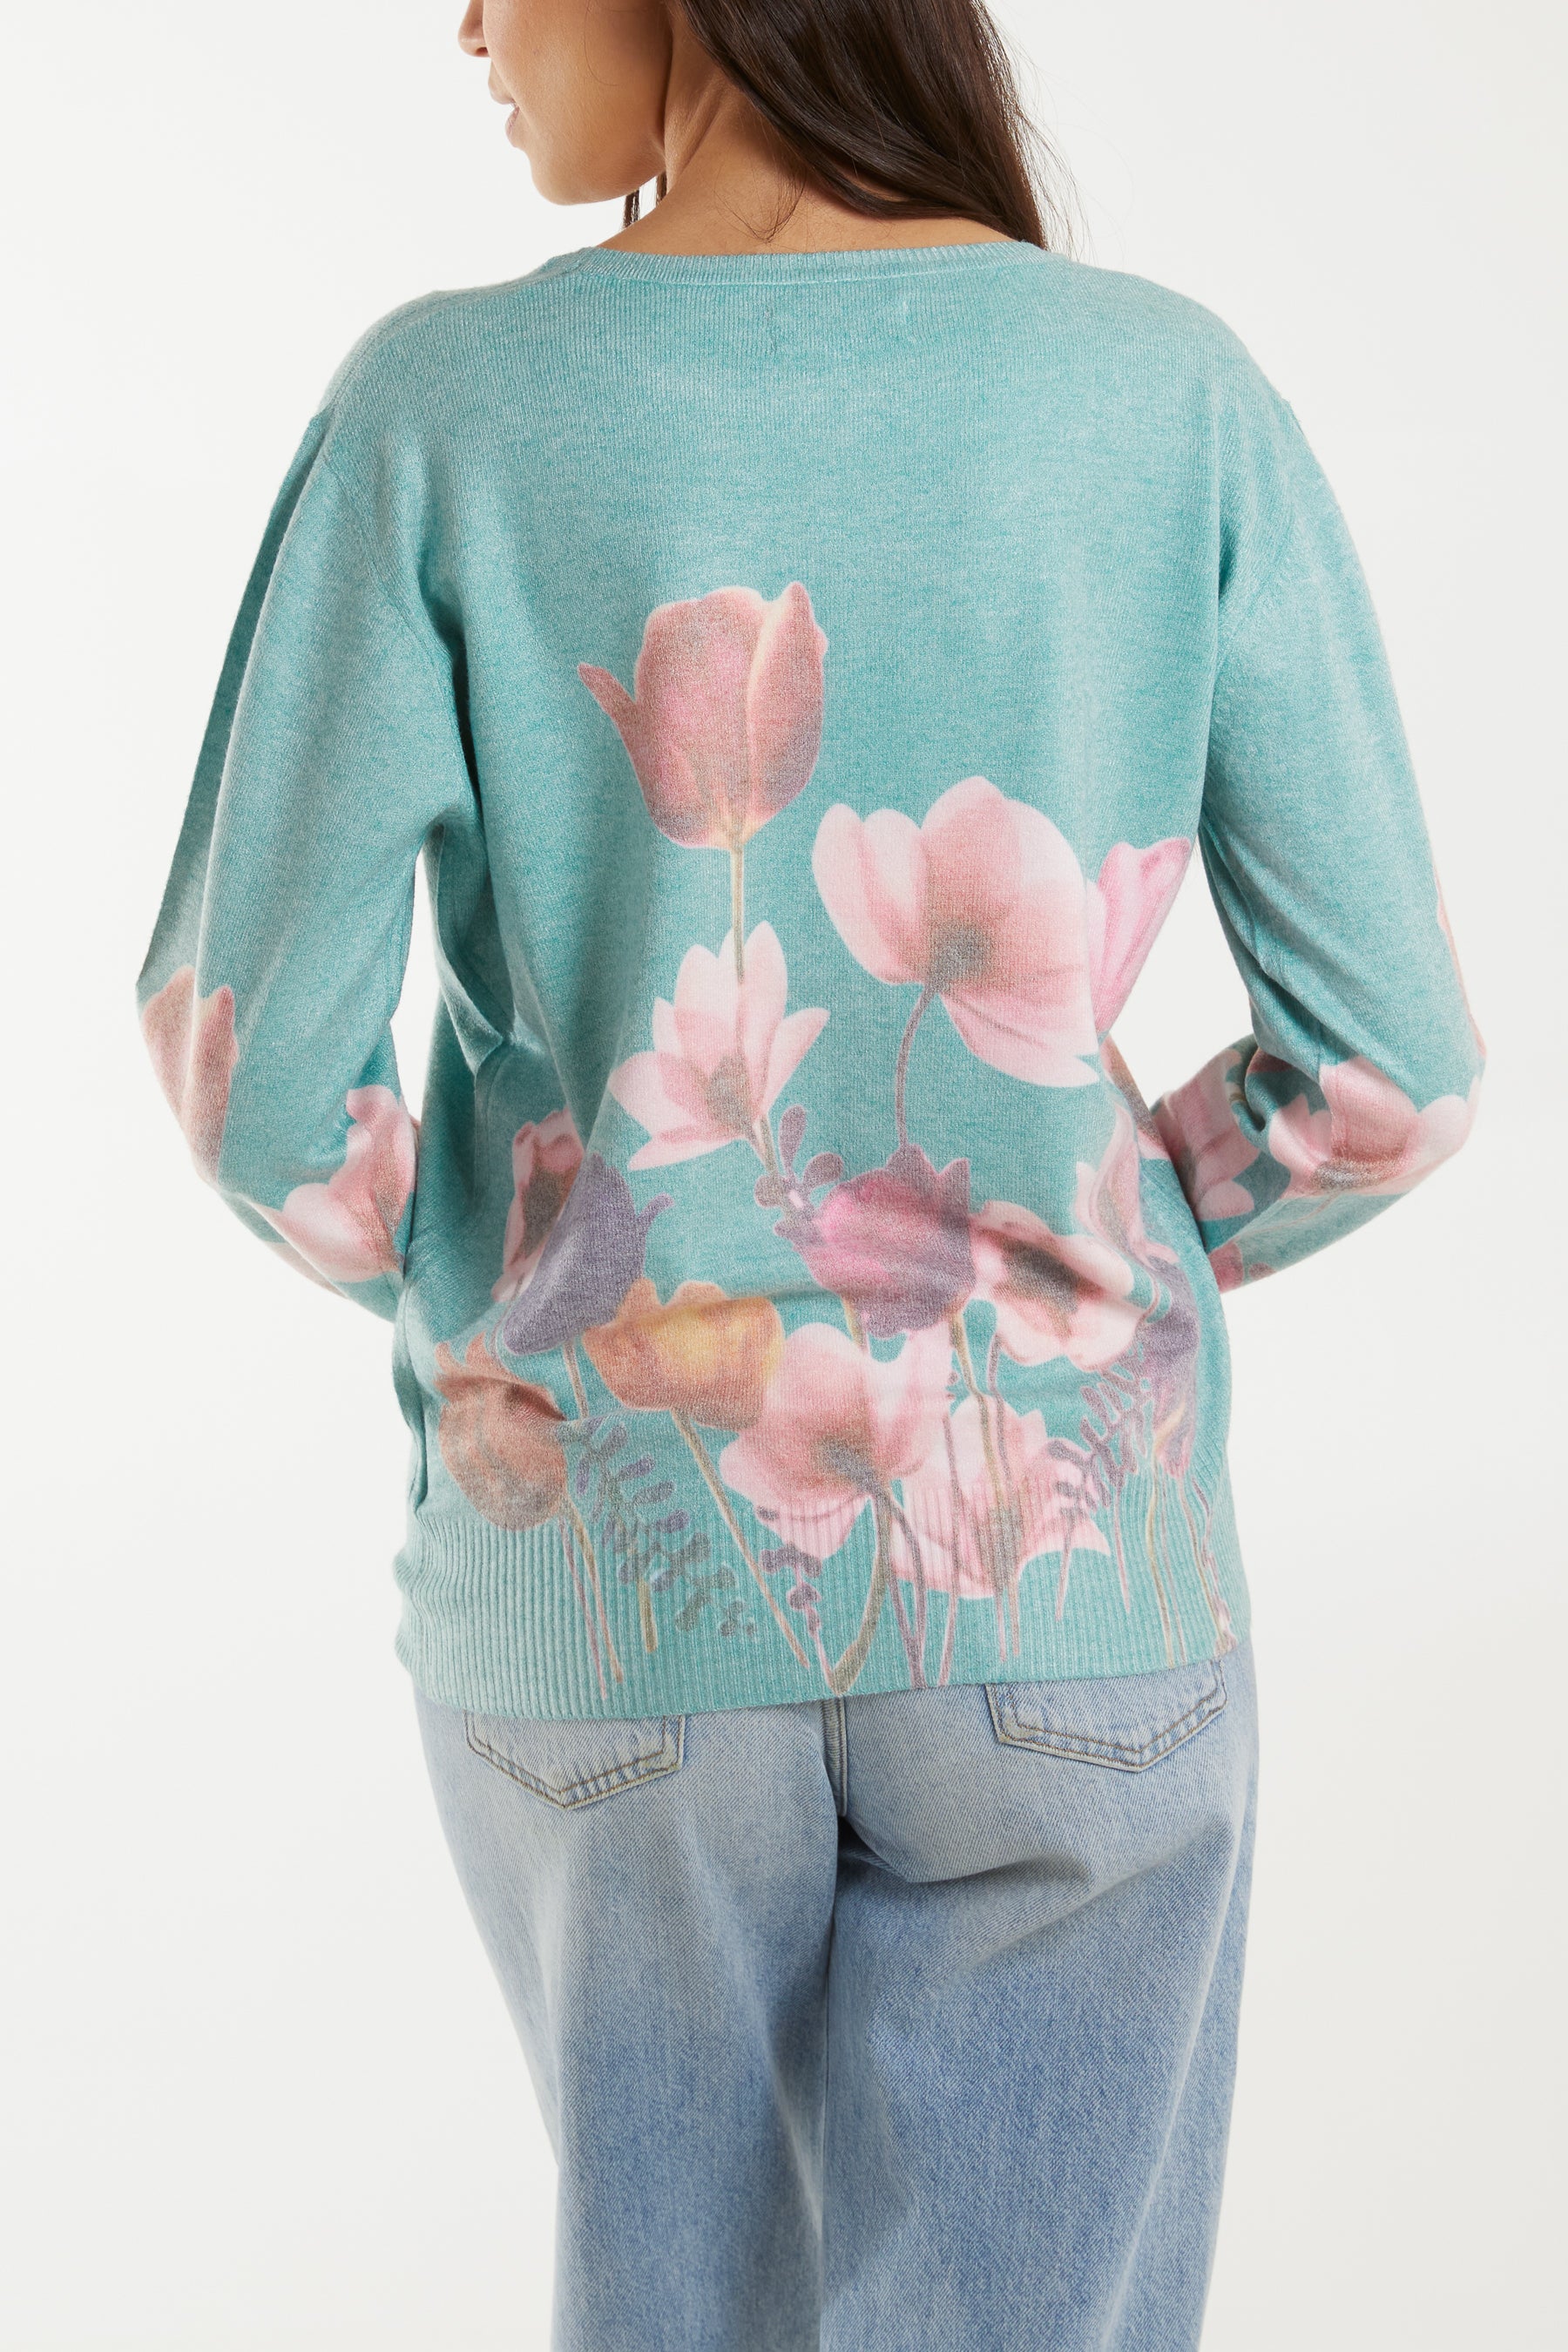 Diamante Bright Floral Patterned Jumper